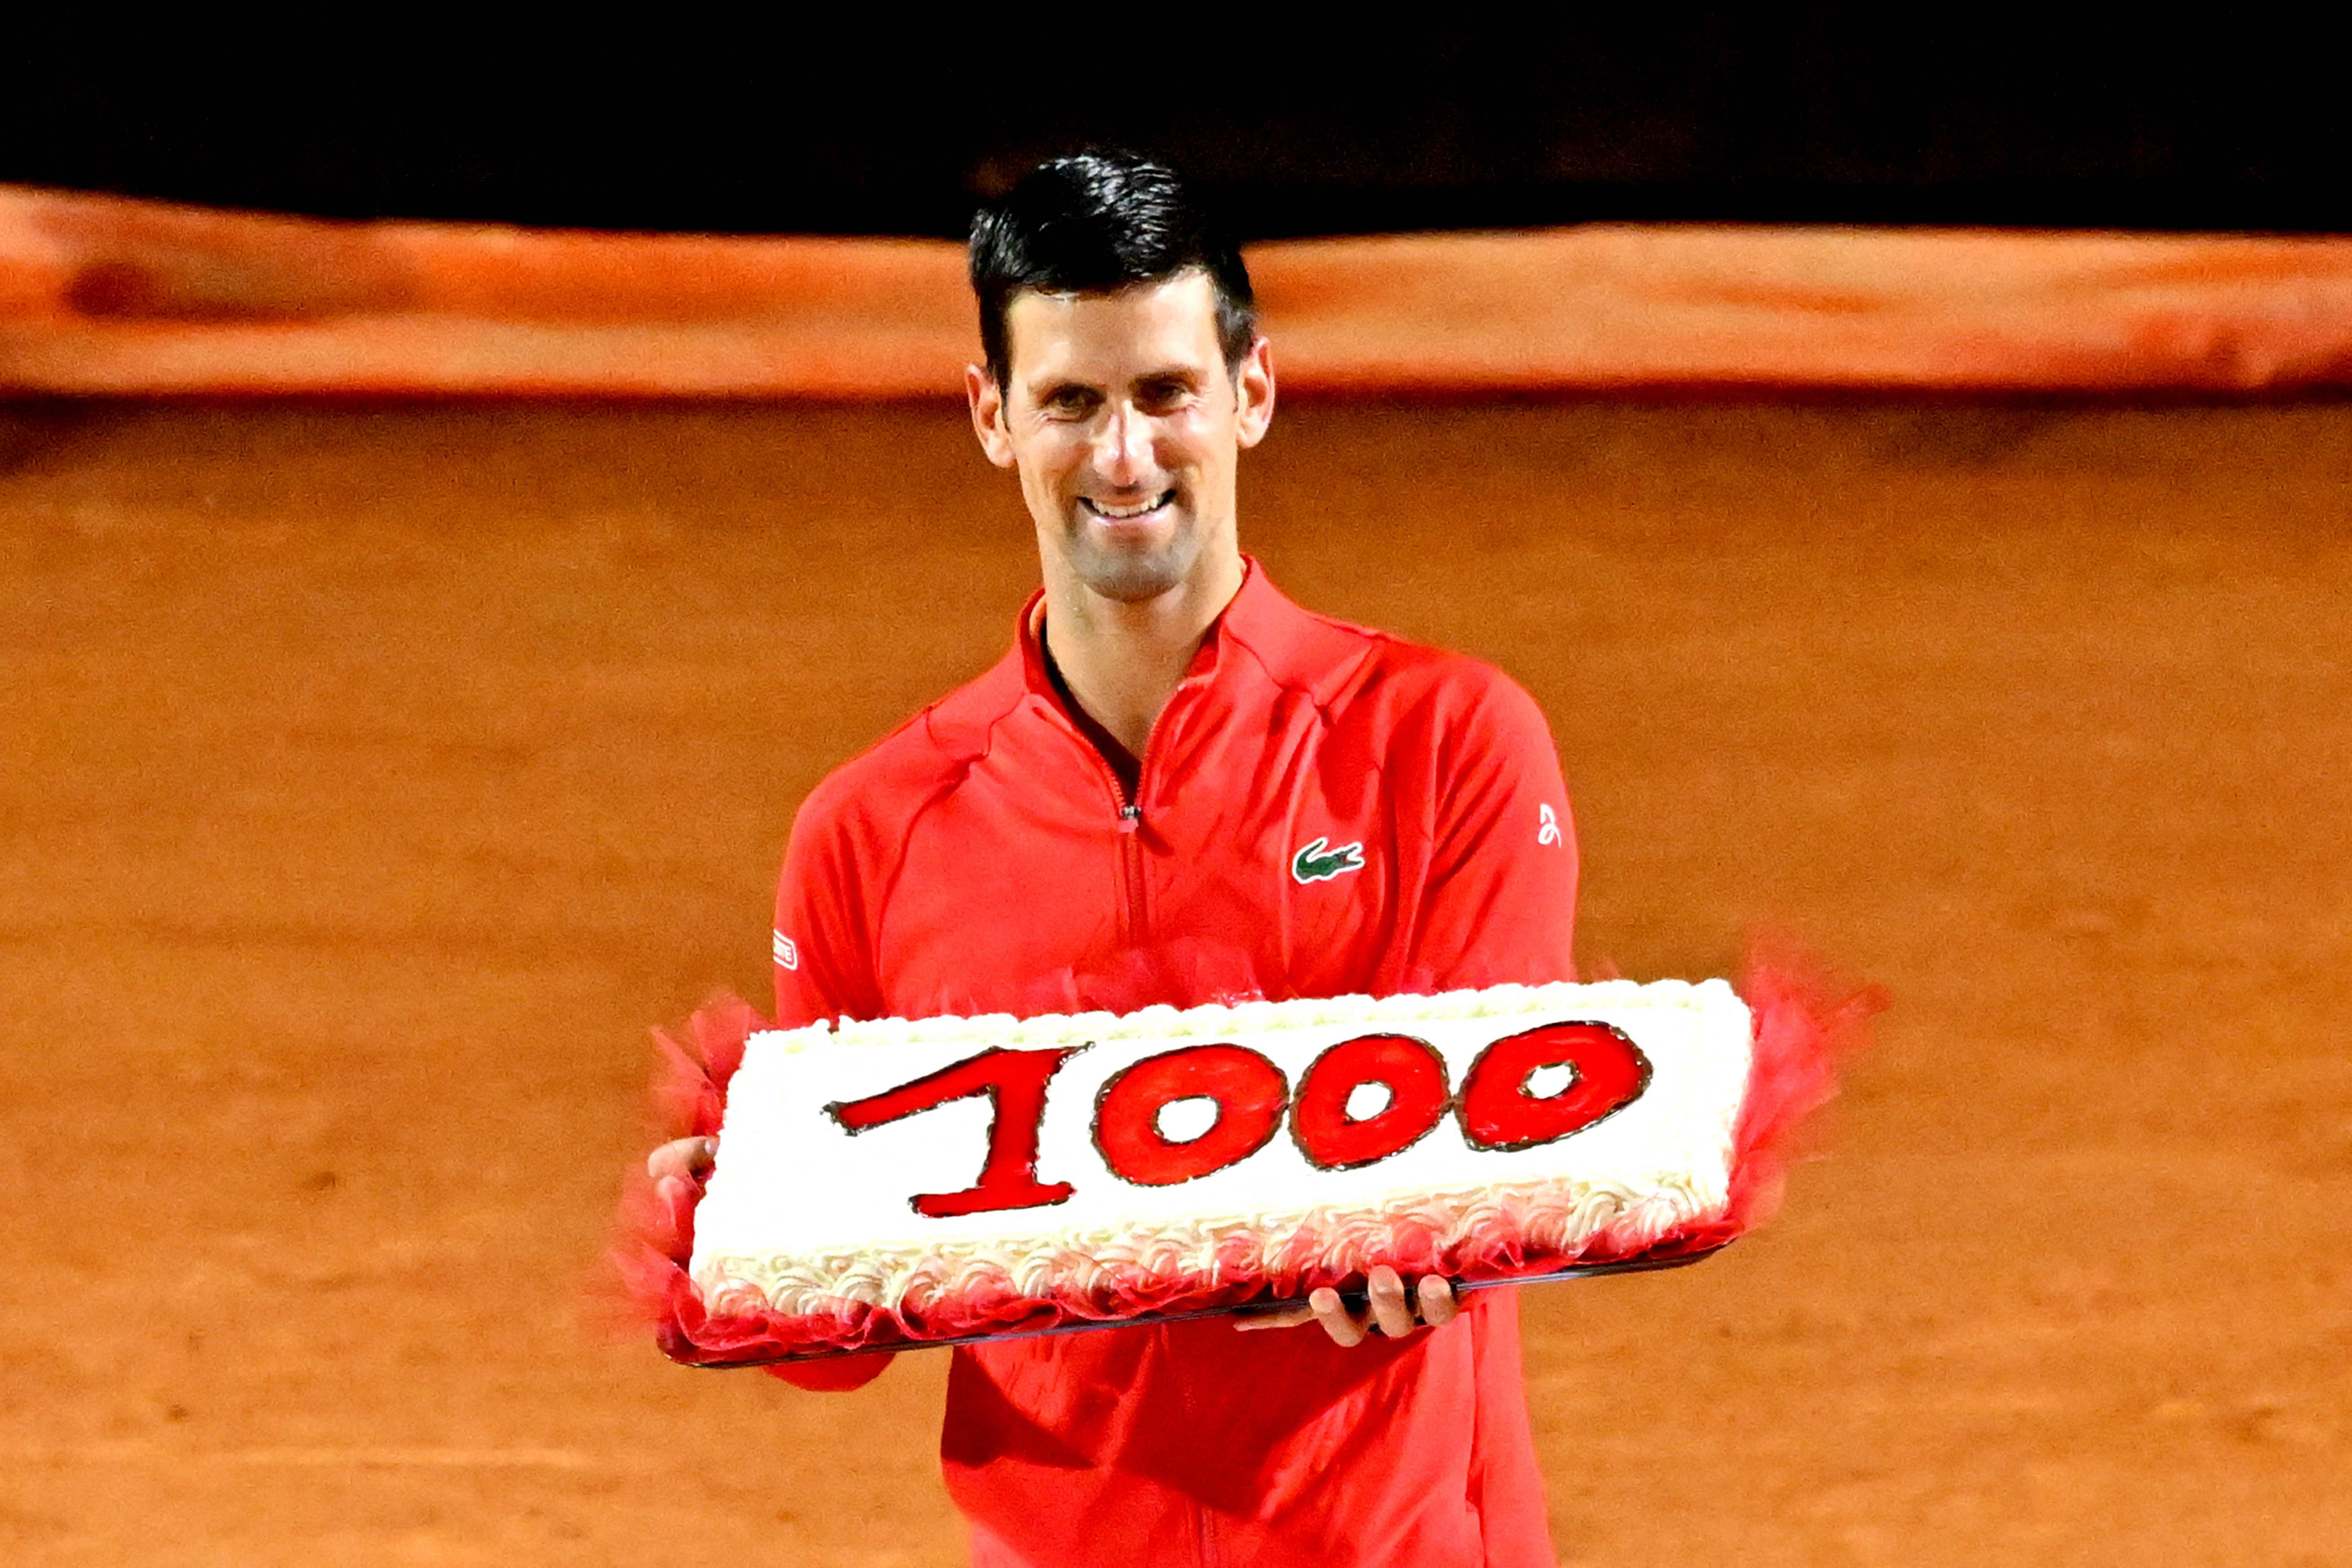 Serbia's Novak Djokovic holds a cake marking his record of 1,000 match wins on the ATP Tour. Credit: AFP Photo